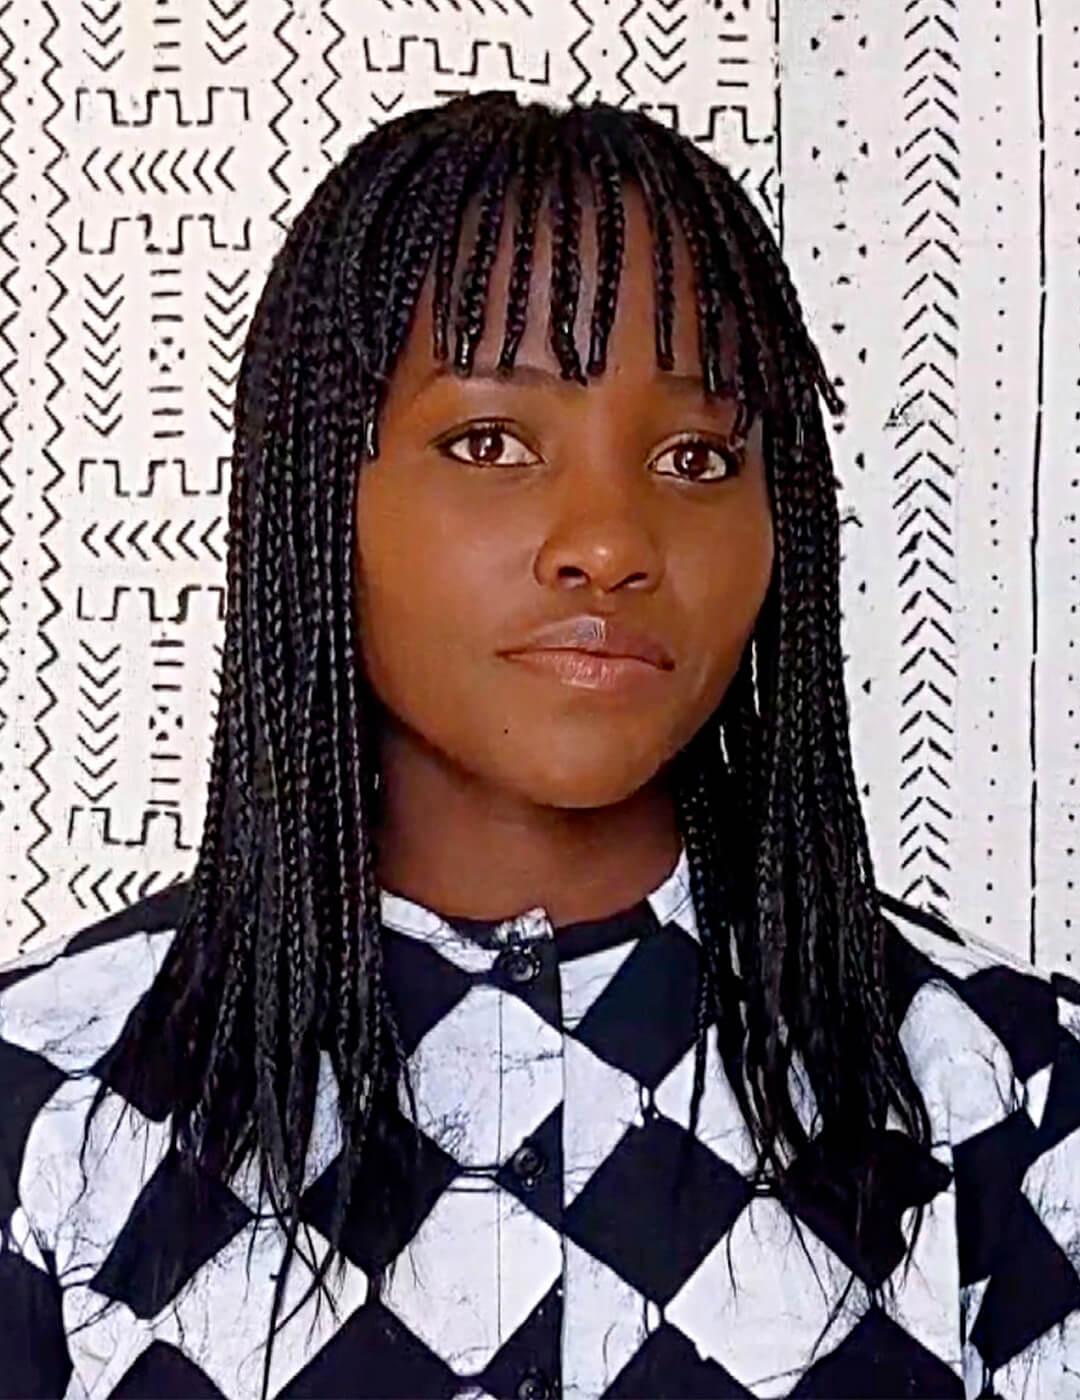 Lupita Nyong'o in a black and white geometric dress rocking a braided hairstyle with braided bangs